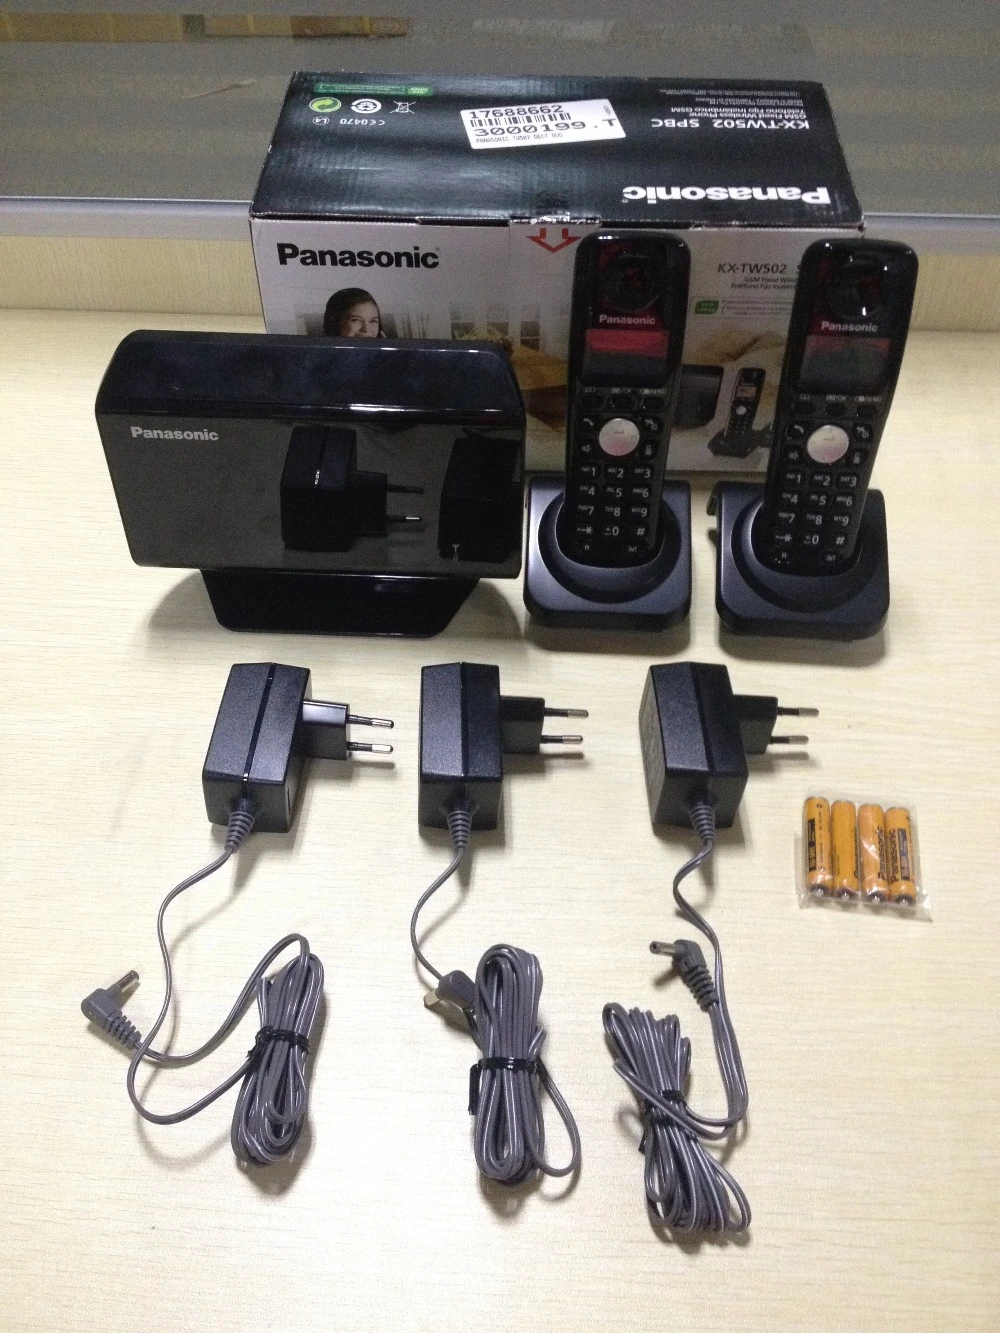 KX-TW502 GSM DECT Wireless phone with 2 handsets